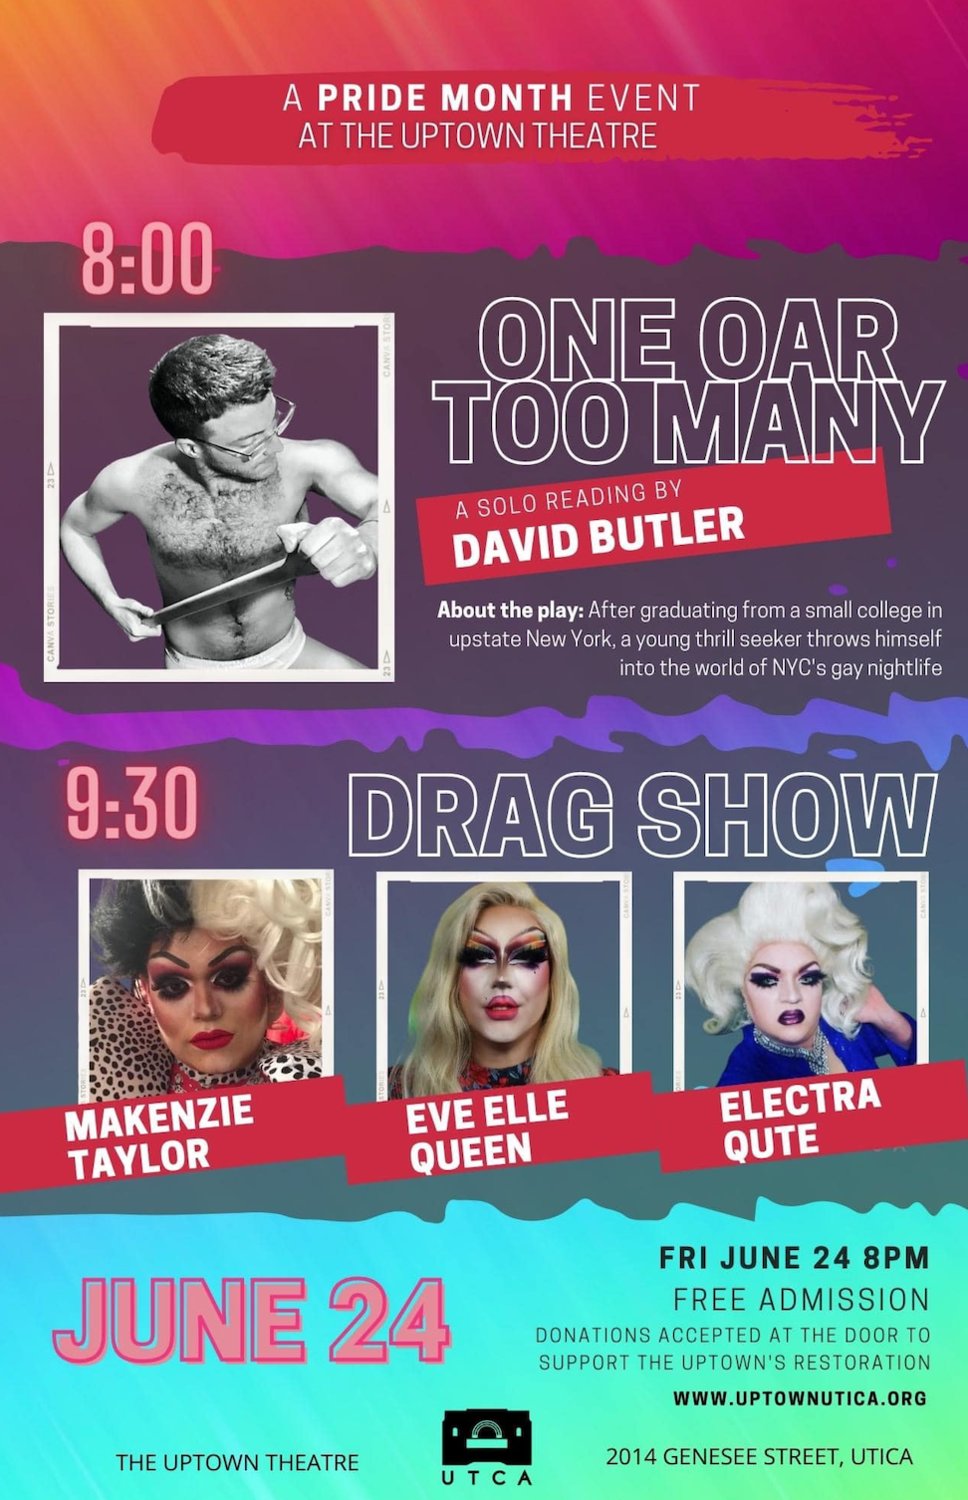 Promotional flyer for the Uptown Theatre for Creative Arts’ pride event, featuring local author David Butler and local drag artists Makenzie Taylor, Eve Elle Queen and Electra Qute.